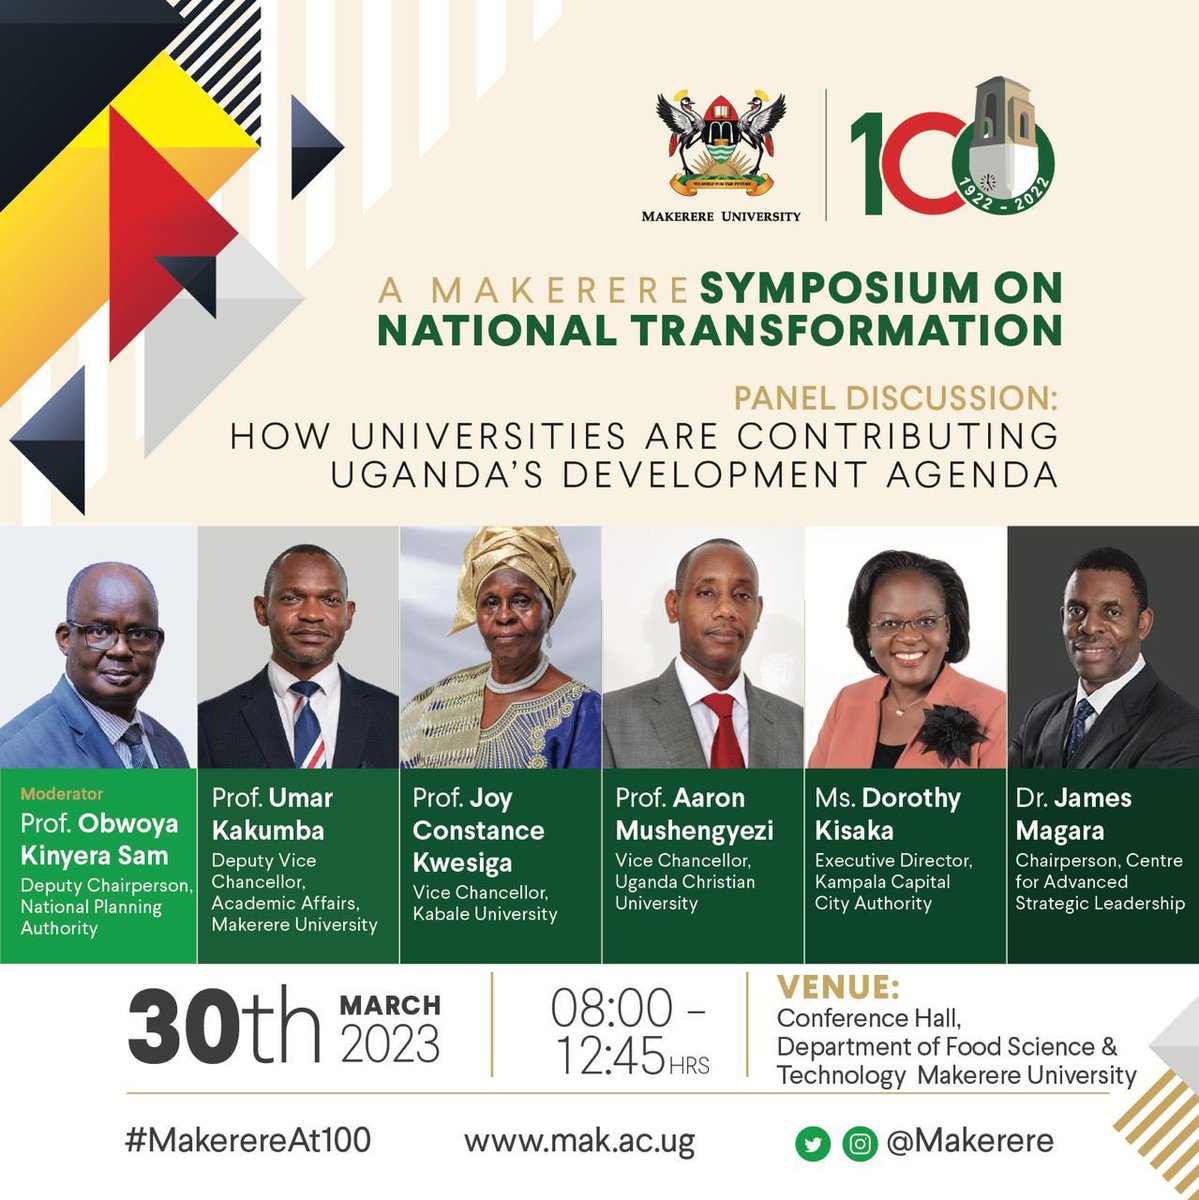 The symposium on the role of universities in shaping national development will achieve the following;
- Formation of strategic partnerships for academic champions for development 
- Africa’s transformation agenda through institutions of higher learning.
#MakerereAt100